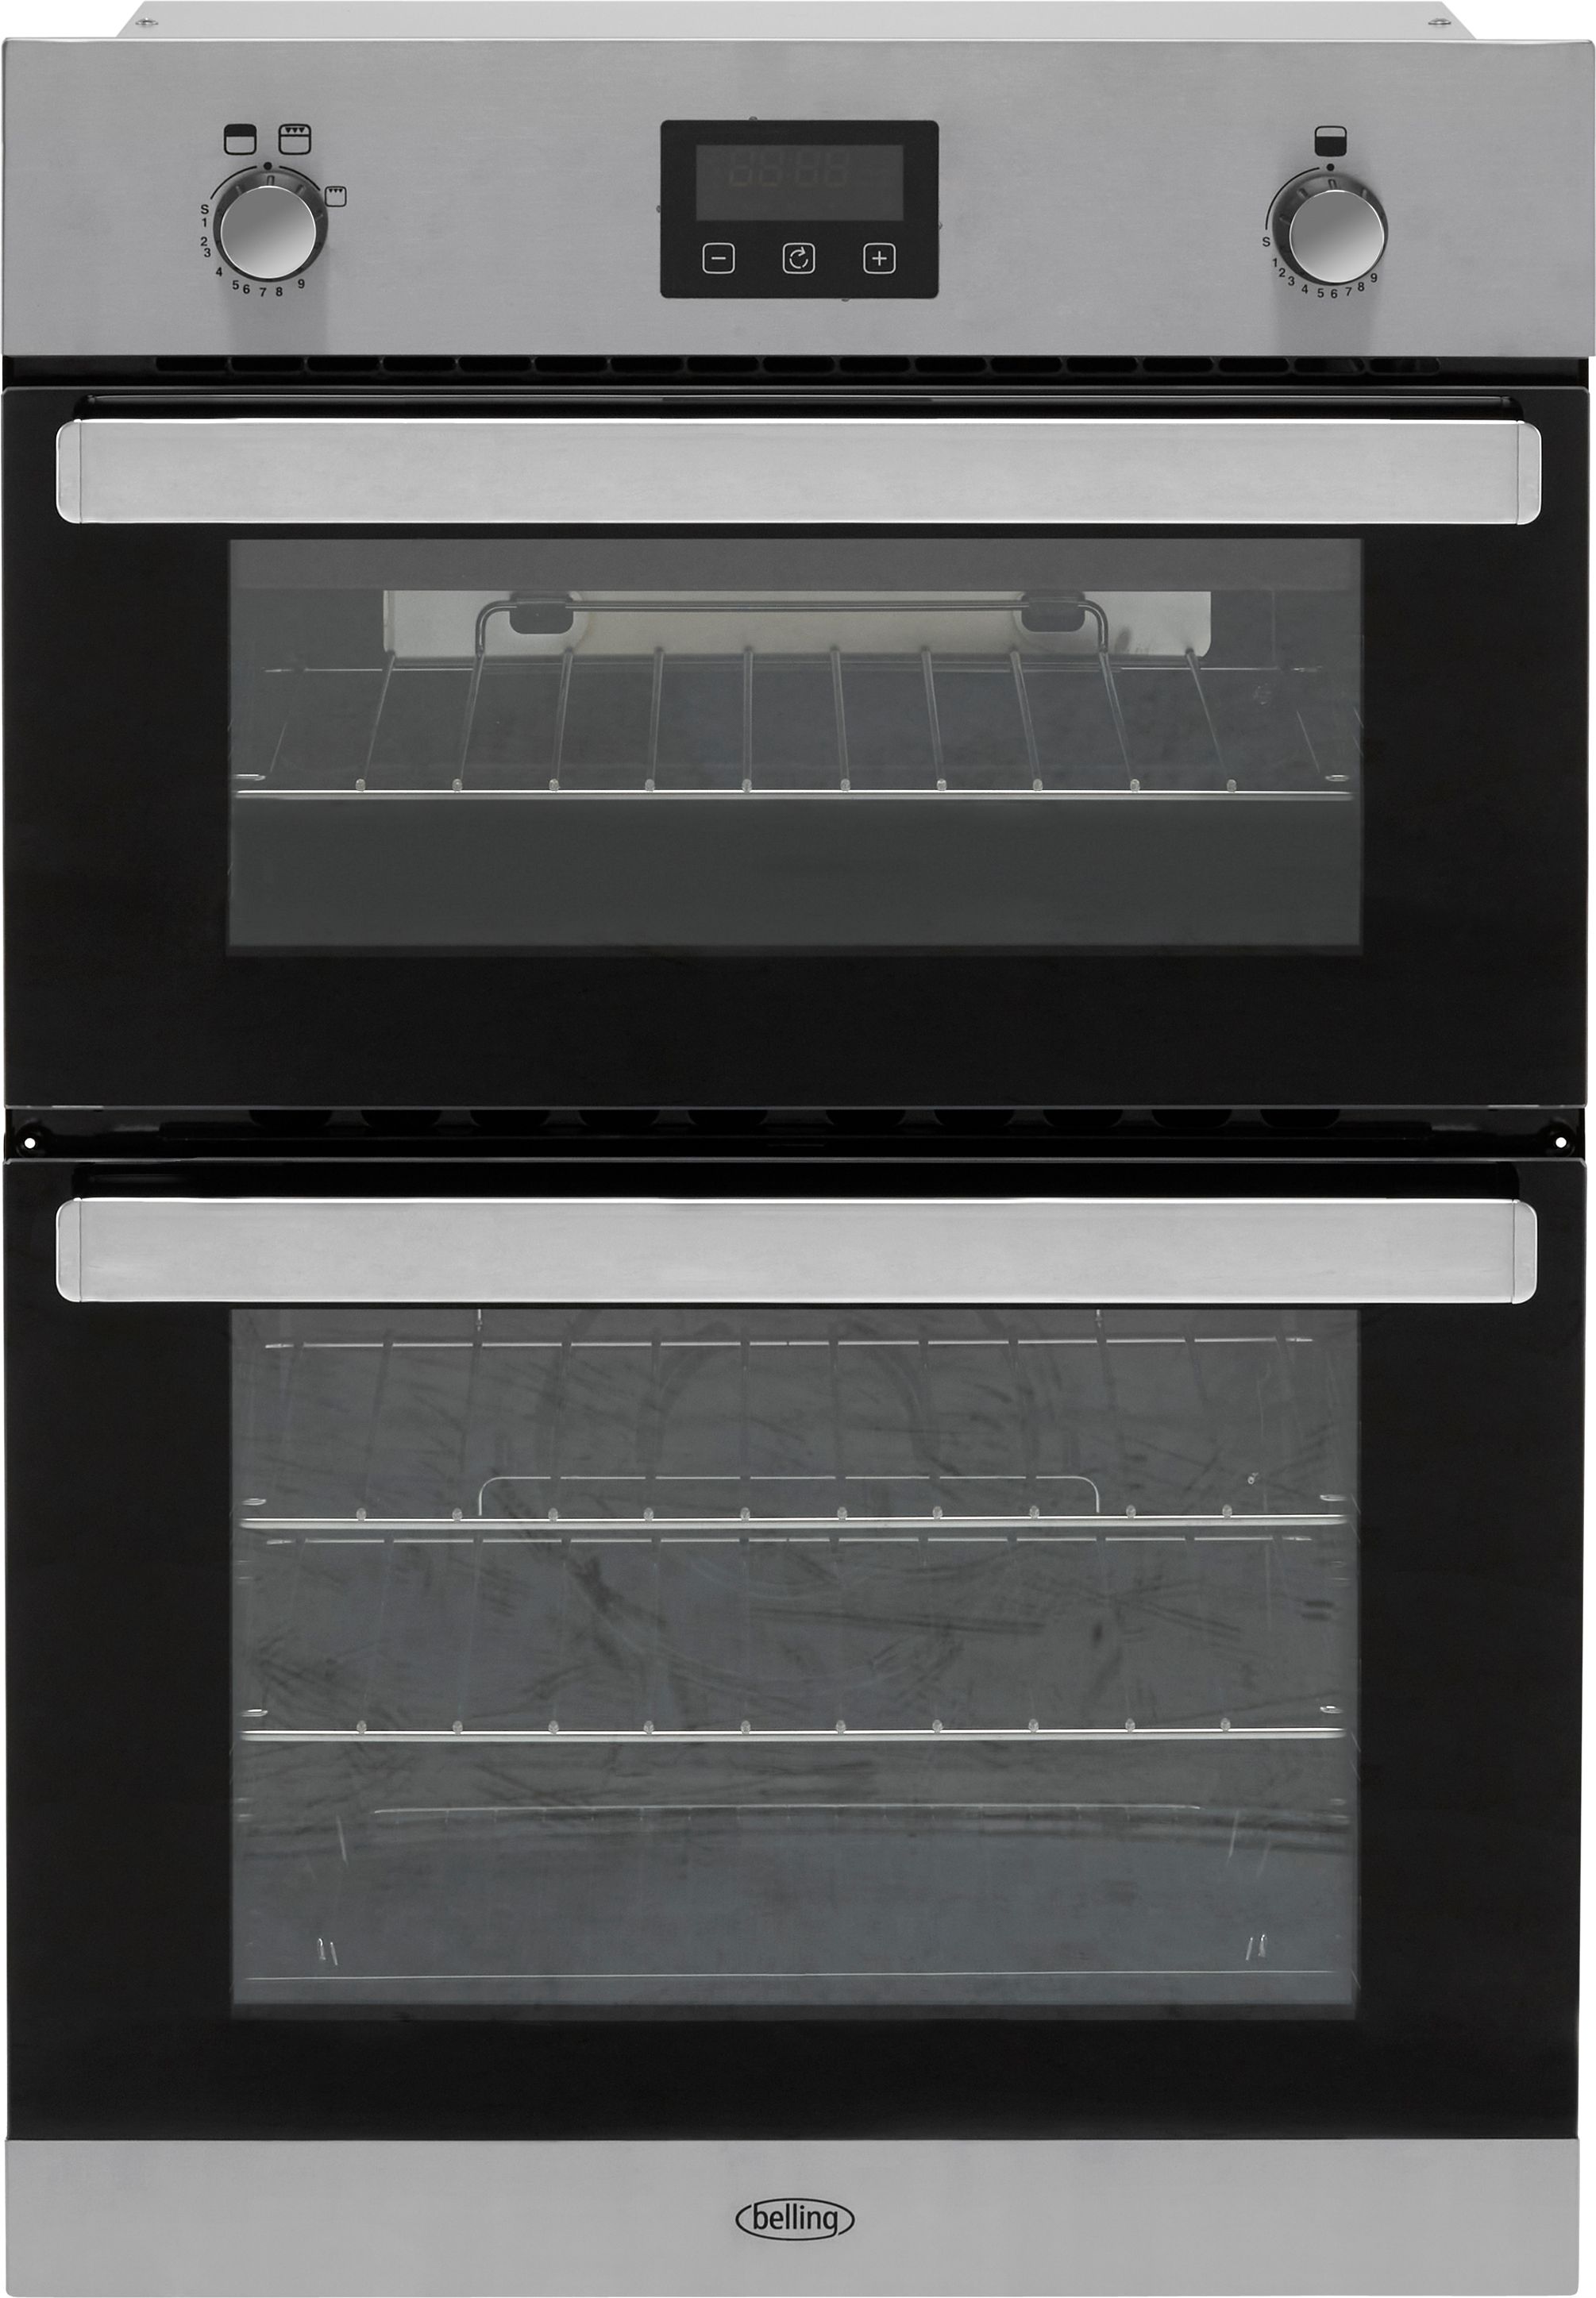 Belling BI902G Built In Gas Double Oven with Full Width Electric Grill - Stainless Steel - A/A Rated, Stainless Steel